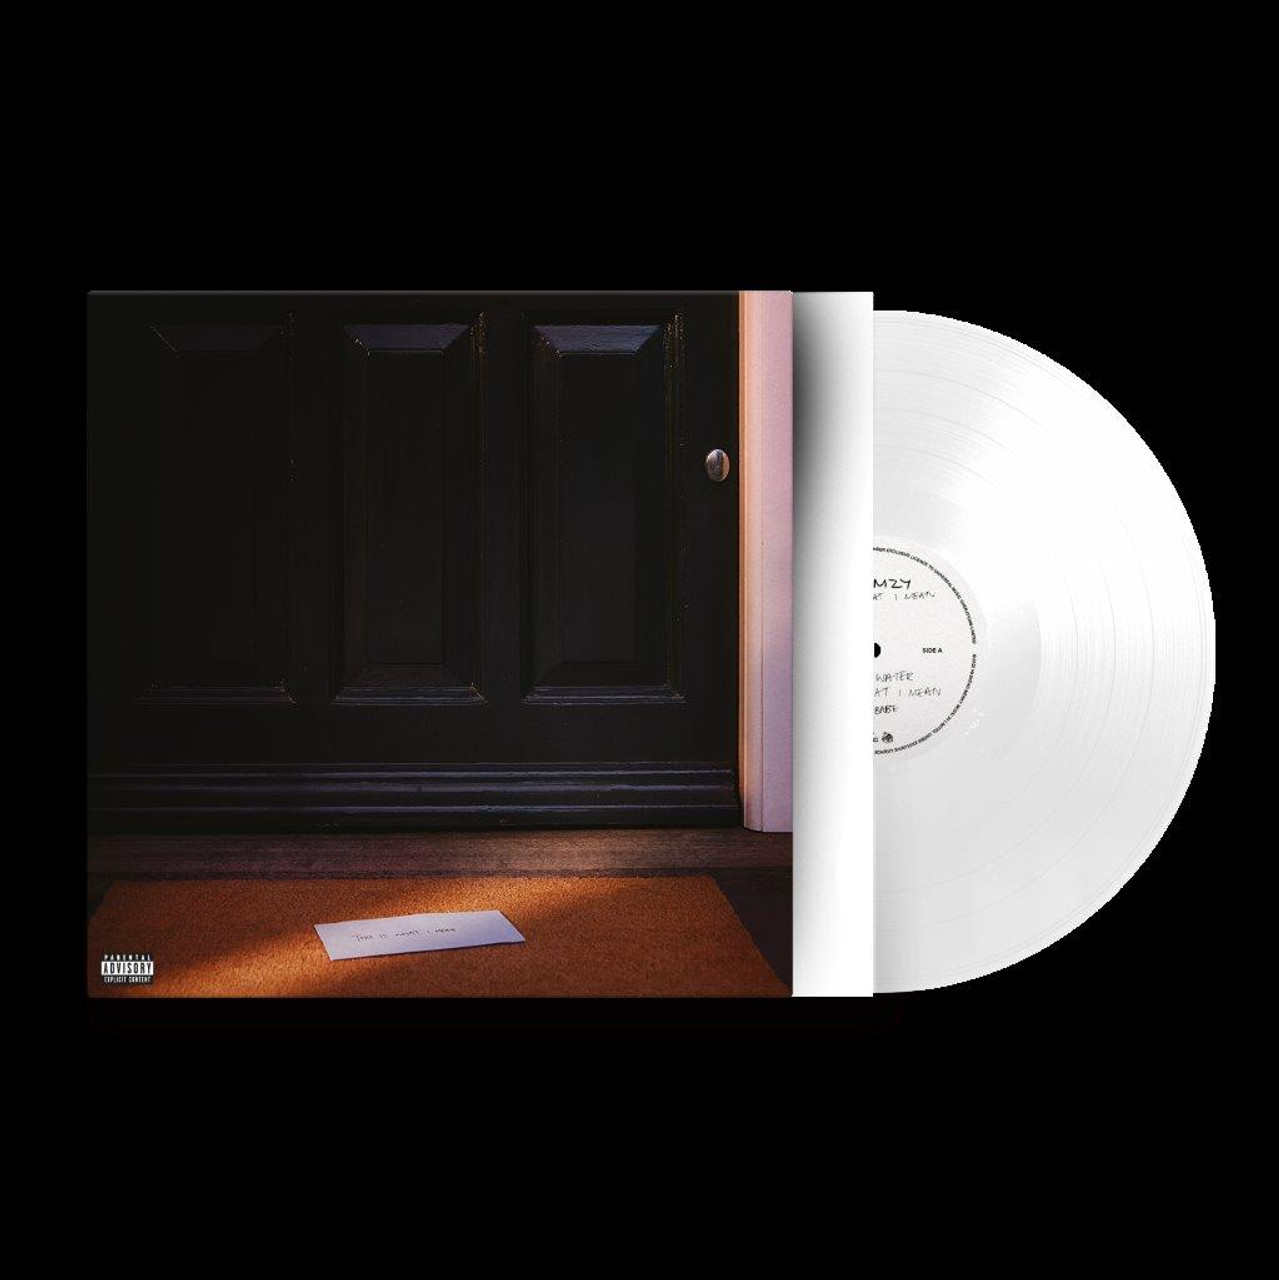 2LP Crystal Clear vinyl - This is What I mean